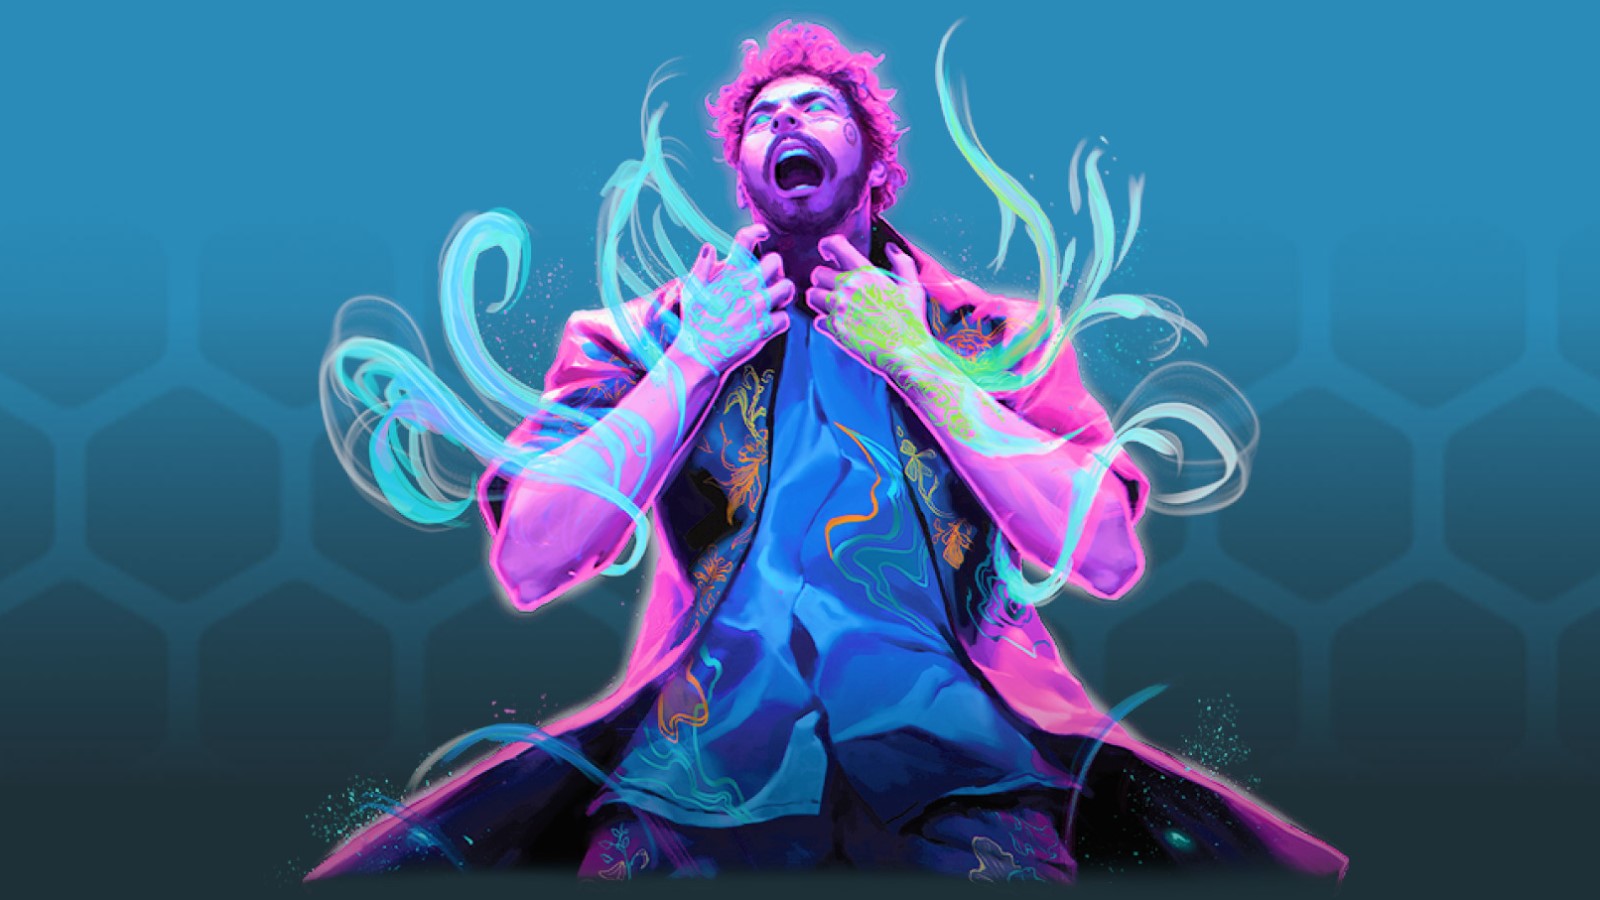 Post Malone-Themed Brawl Event Coming To MTG Arena - Star City Games